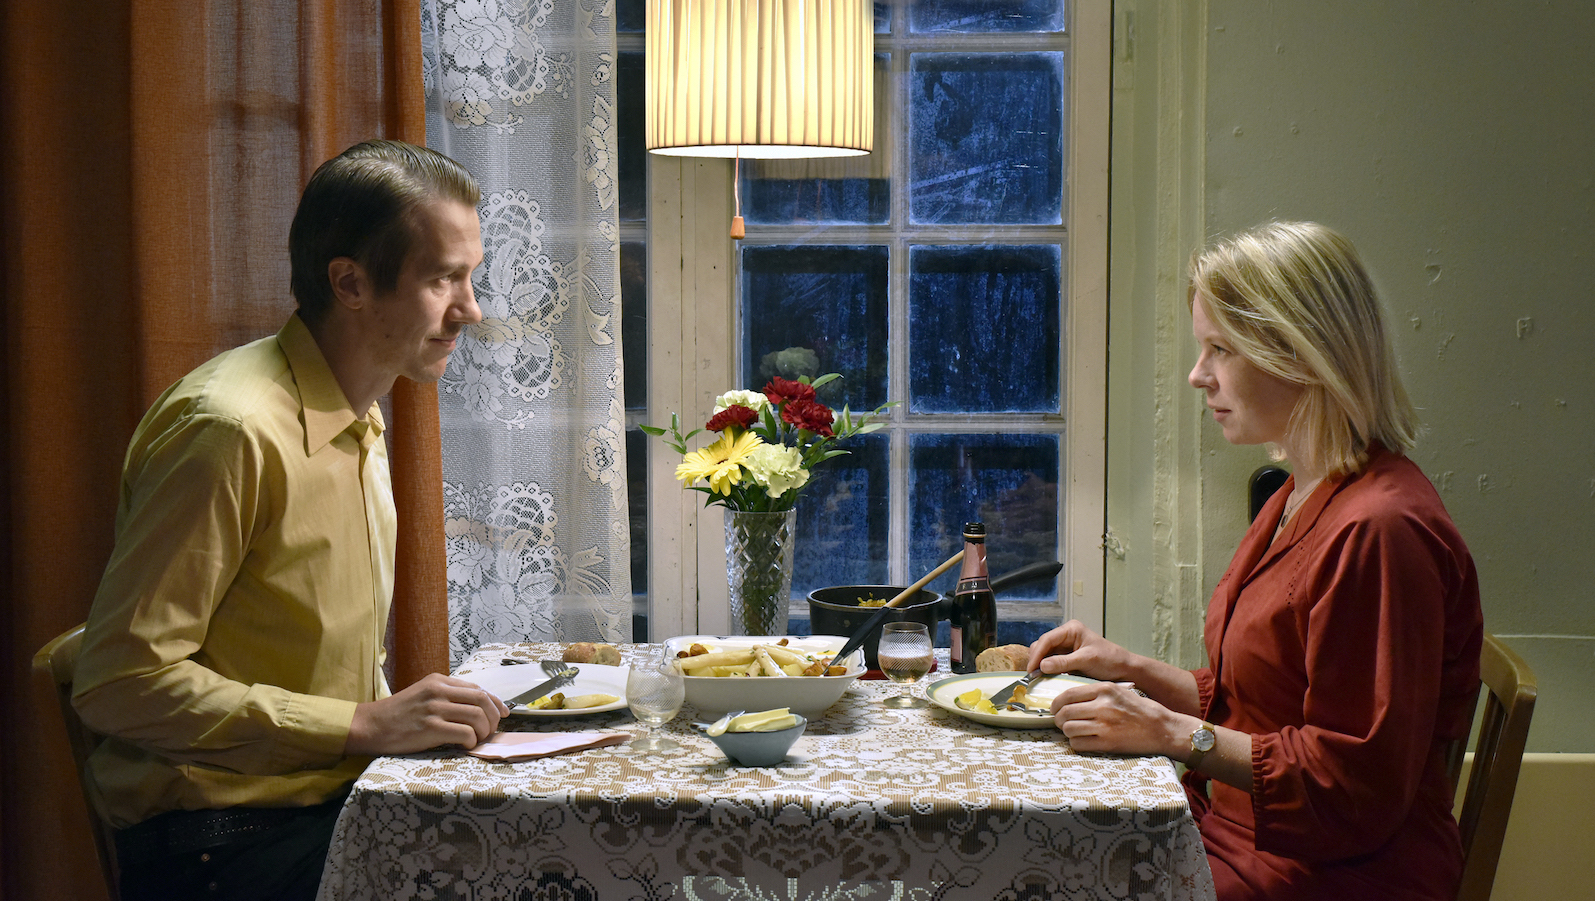 A man and woman sit at a table with flowers on it having dinner and facing each other